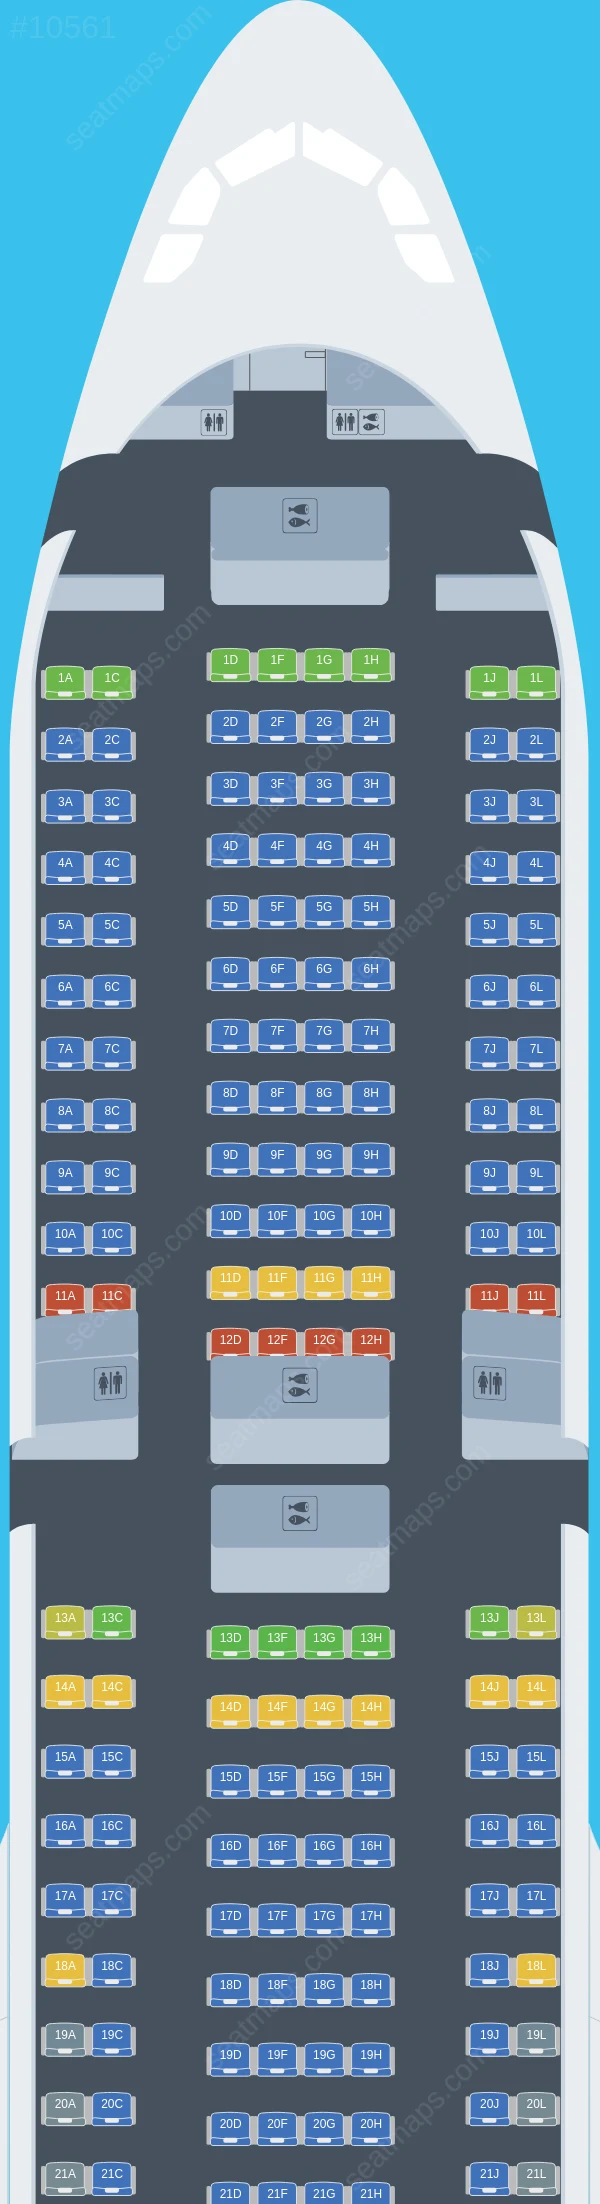 World 2 Fly Airbus A330-300 seatmap preview